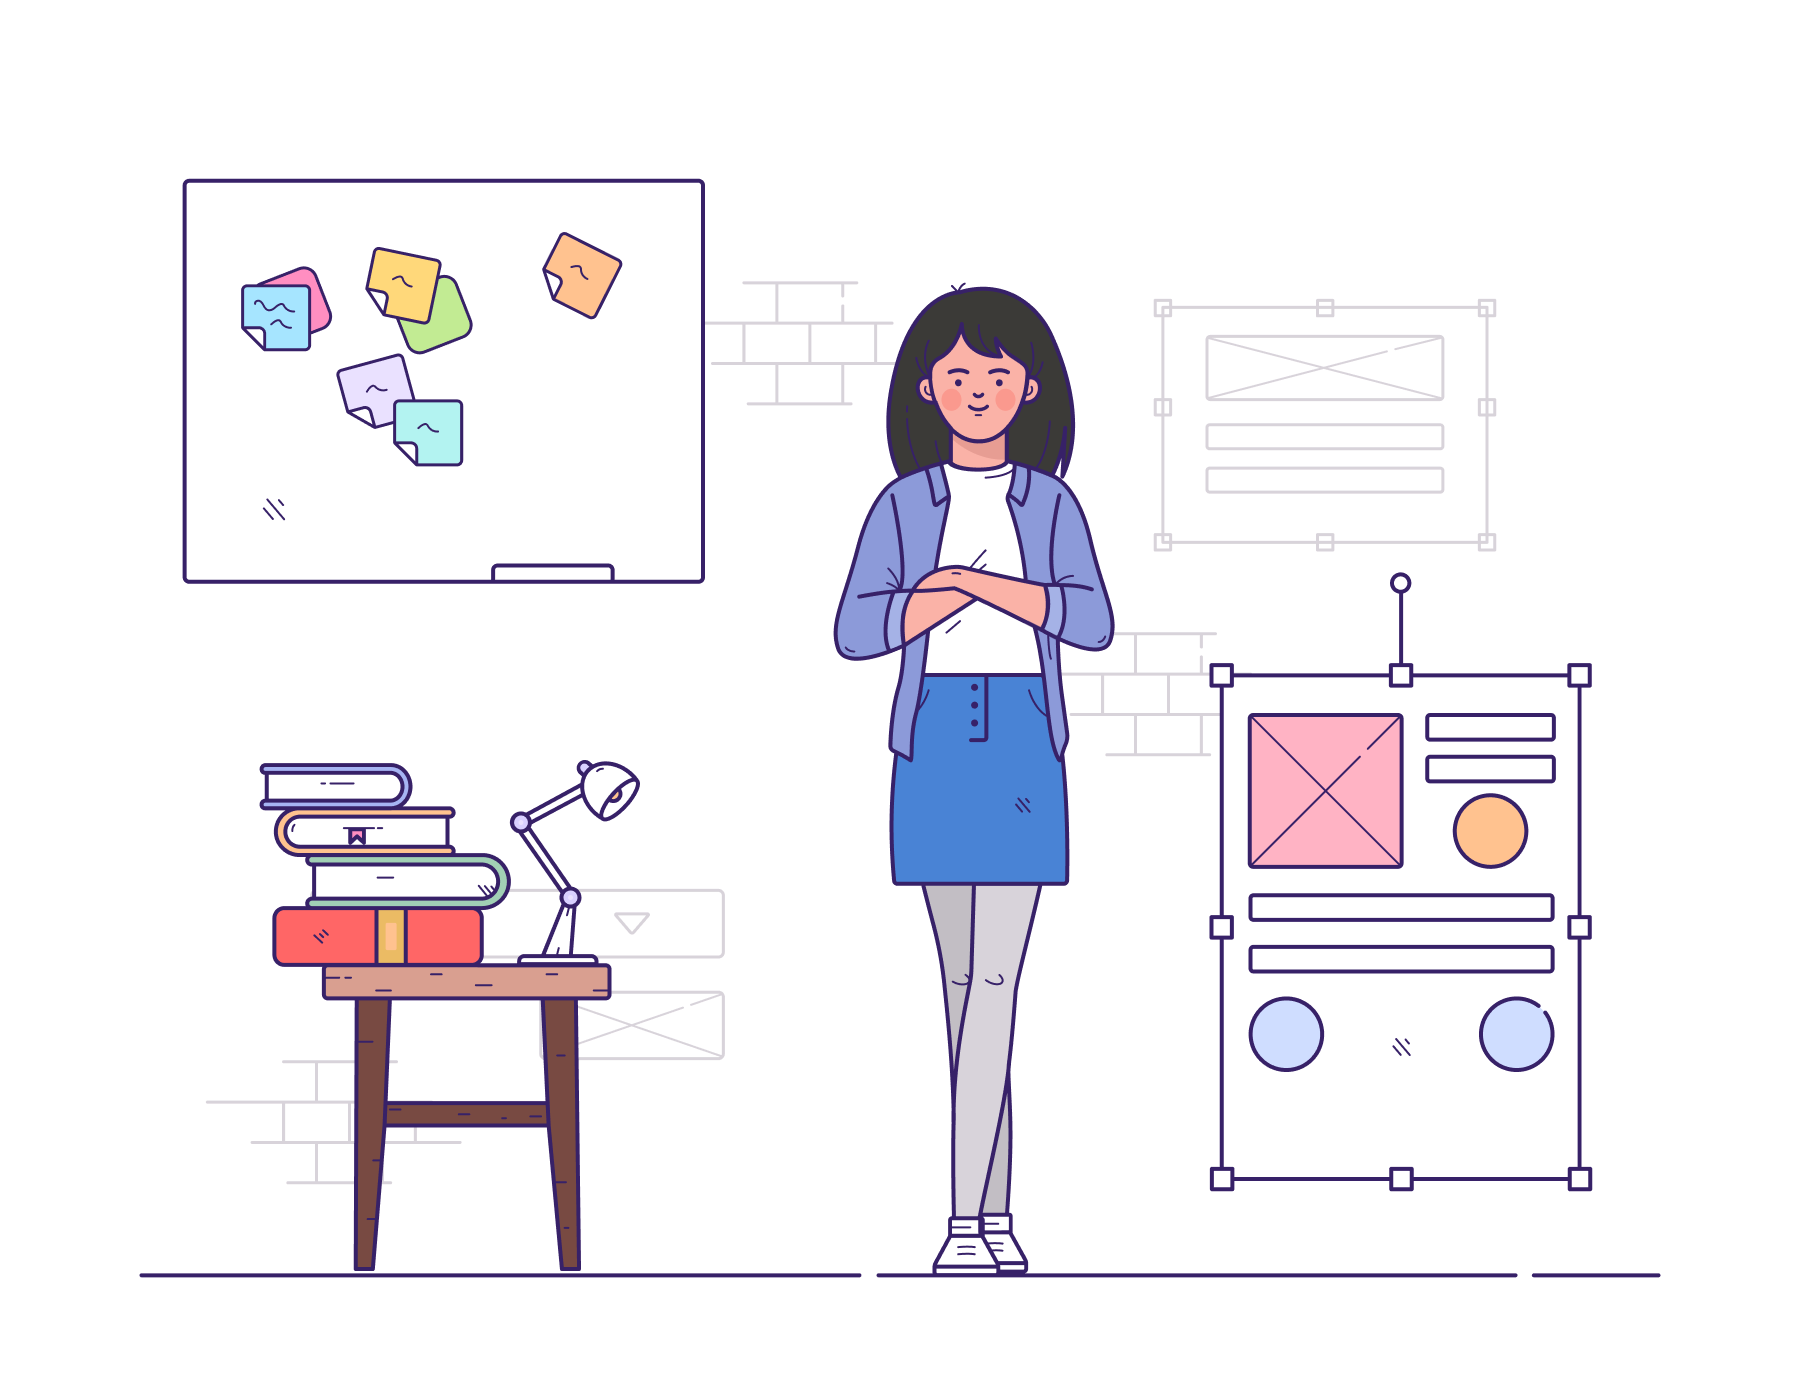 Illustration of a student standing in an office beside a photocopier and holding a cup, with a whiteboard with sticky notes behind her.